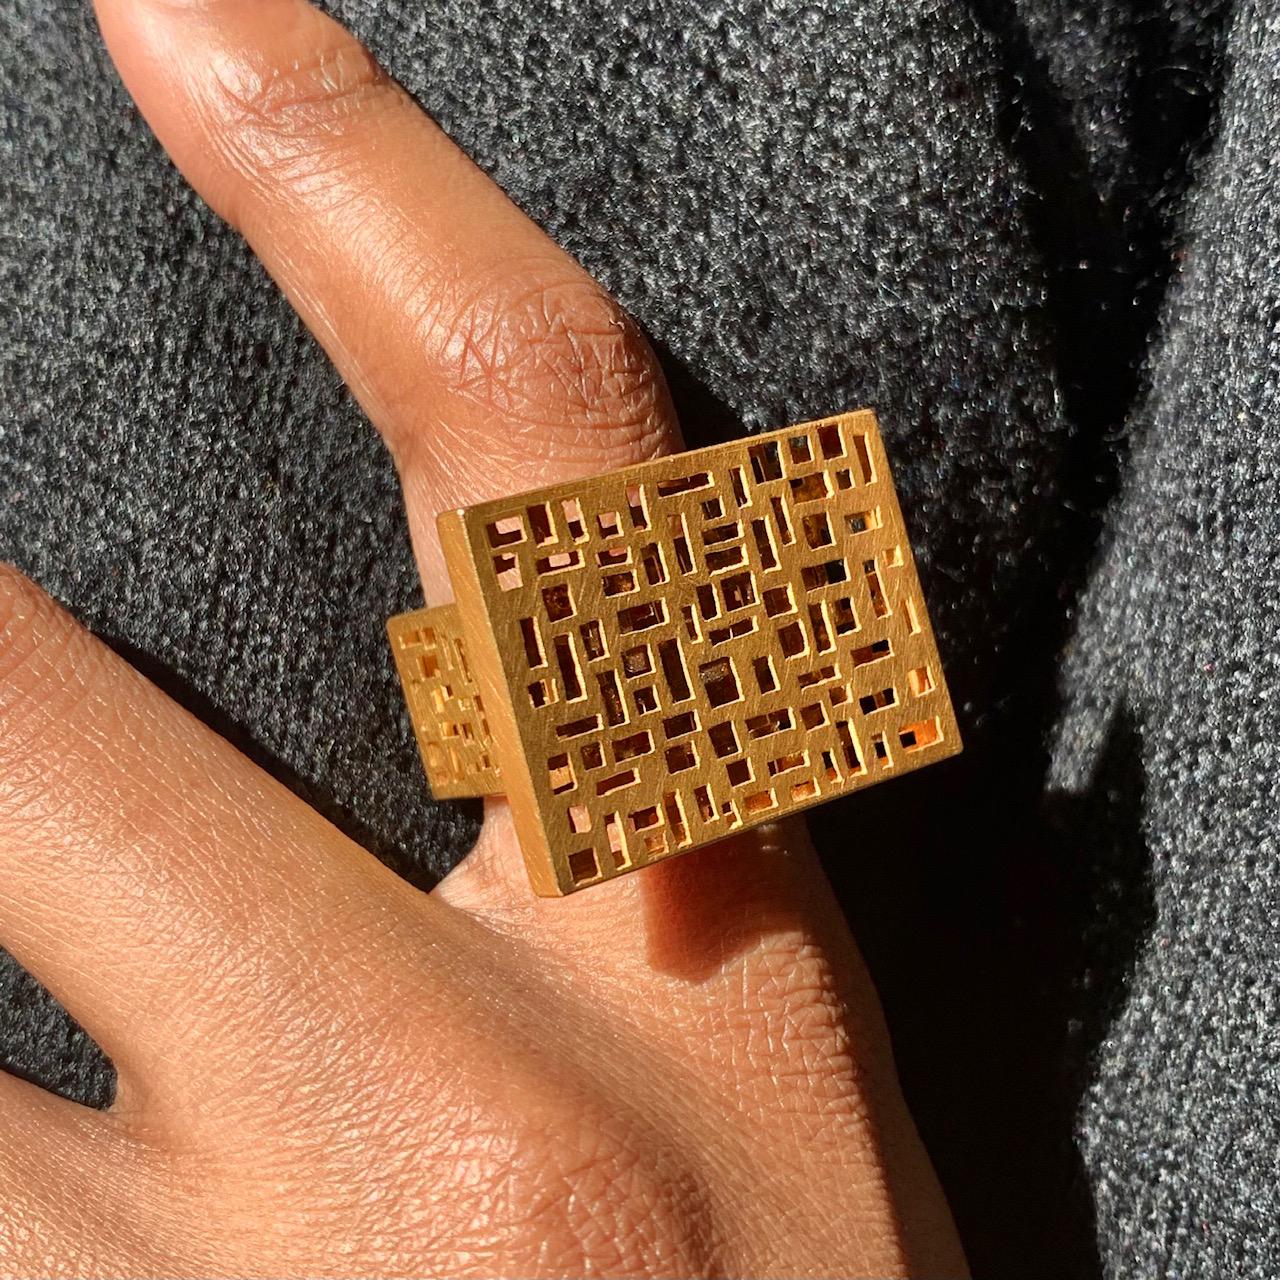 A striking modernist, perforated 8-karat yellow gold ring. The perforations run down both sides of the gold shank. Size 7, stamped. Very comfortable on the finger. Attributed to Michael Becker.

A sculptural statement cocktail ring. The unique